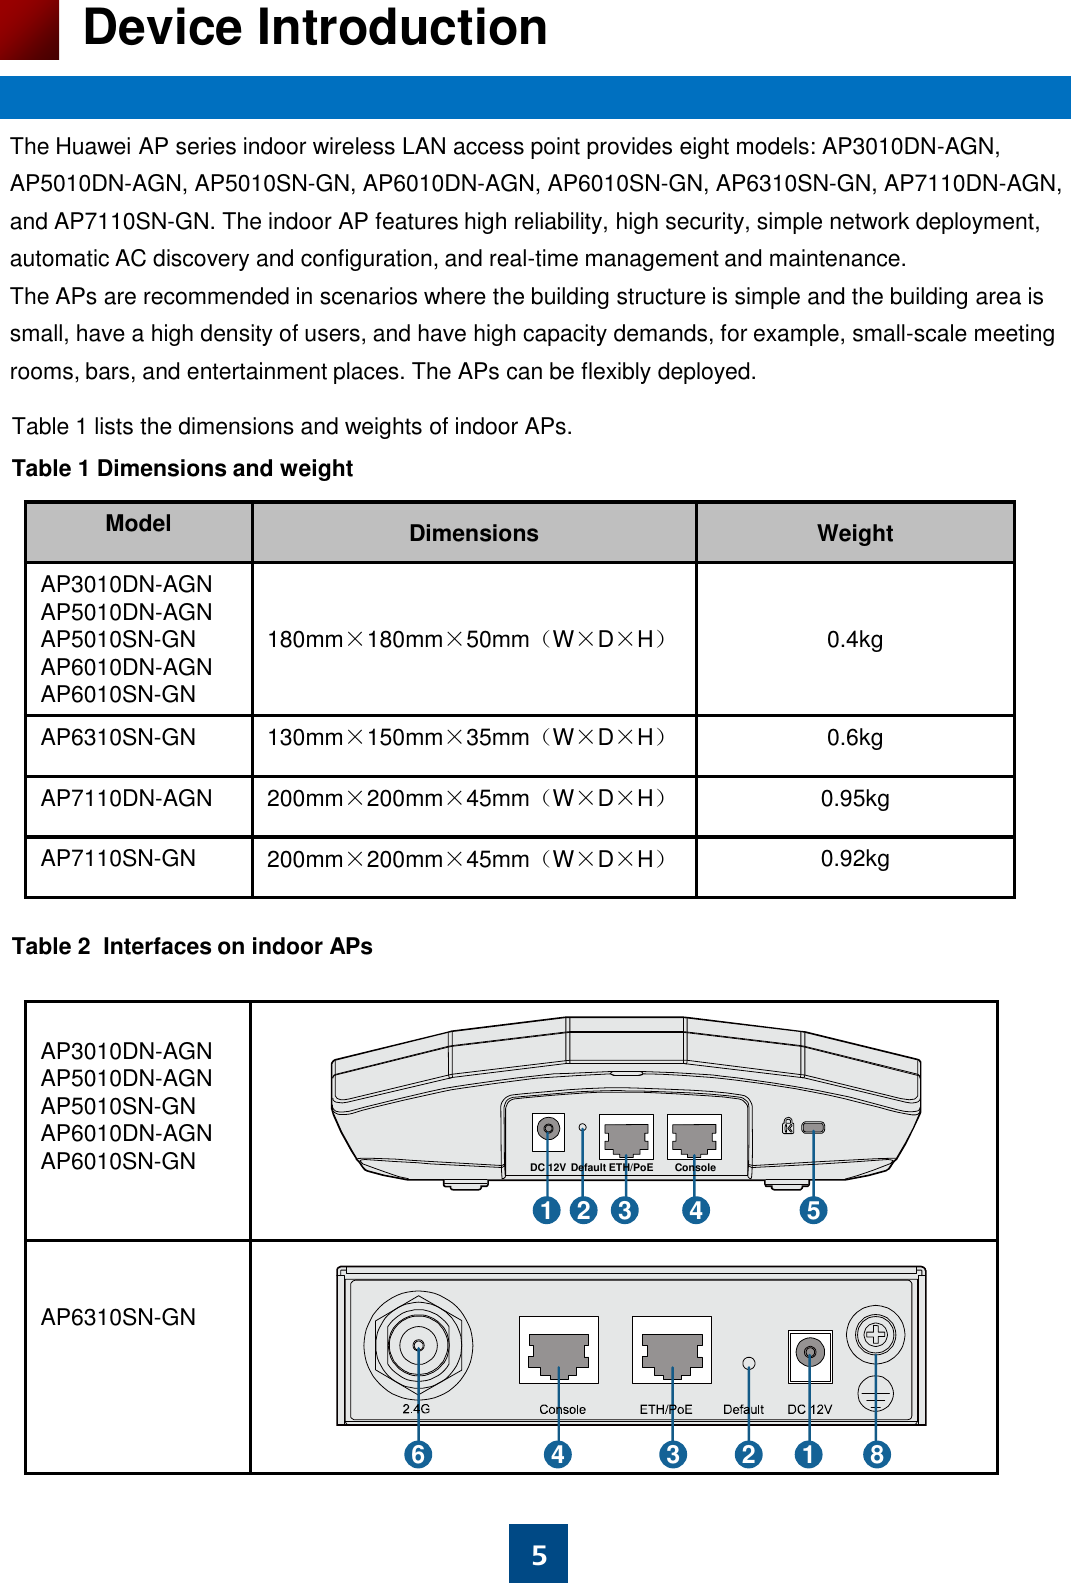 5 Device Introduction The Huawei AP series indoor wireless LAN access point provides eight models: AP3010DN-AGN, AP5010DN-AGN, AP5010SN-GN, AP6010DN-AGN, AP6010SN-GN, AP6310SN-GN, AP7110DN-AGN, and AP7110SN-GN. The indoor AP features high reliability, high security, simple network deployment, automatic AC discovery and configuration, and real-time management and maintenance. The APs are recommended in scenarios where the building structure is simple and the building area is small, have a high density of users, and have high capacity demands, for example, small-scale meeting rooms, bars, and entertainment places. The APs can be flexibly deployed.  Table 1 lists the dimensions and weights of indoor APs.  Table 1 Dimensions and weight   Model Dimensions Weight AP3010DN-AGN AP5010DN-AGN AP5010SN-GN AP6010DN-AGN AP6010SN-GN   180mm×180mm×50mm（W×D×H）   0.4kg AP6310SN-GN 130mm×150mm×35mm（W×D×H） 0.6kg AP7110DN-AGN 200mm×200mm×45mm（W×D×H） 0.95kg AP7110SN-GN 200mm×200mm×45mm（W×D×H） 0.92kg Table 2  Interfaces on indoor APs    AP3010DN-AGN AP5010DN-AGN AP5010SN-GN AP6010DN-AGN AP6010SN-GN    AP6310SN-GN 1  2  3  4  5 DC 12V  Default  ETH/PoE  Console 1 2 3 4 6  8 